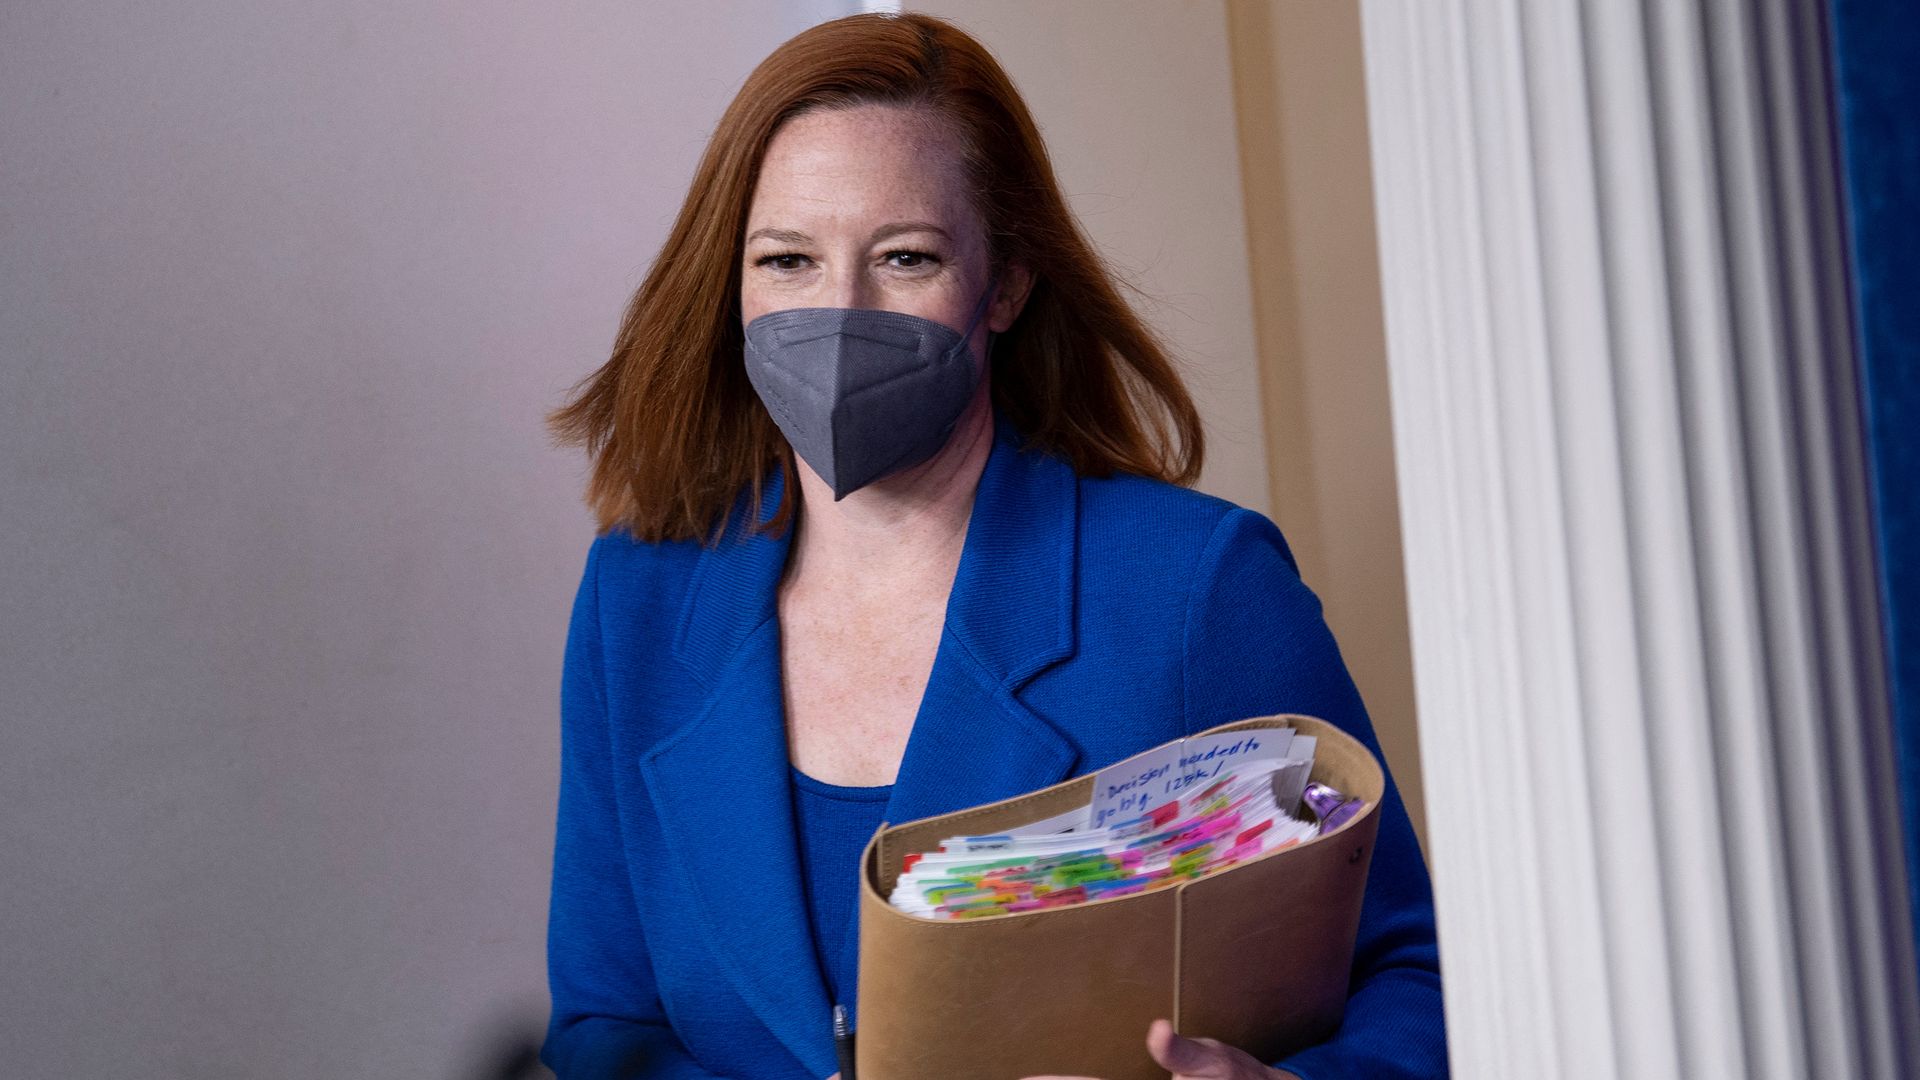 White House Press Secretary Jen Psaki is seen toting a tabbed binder as she arrives for her daily briefing.